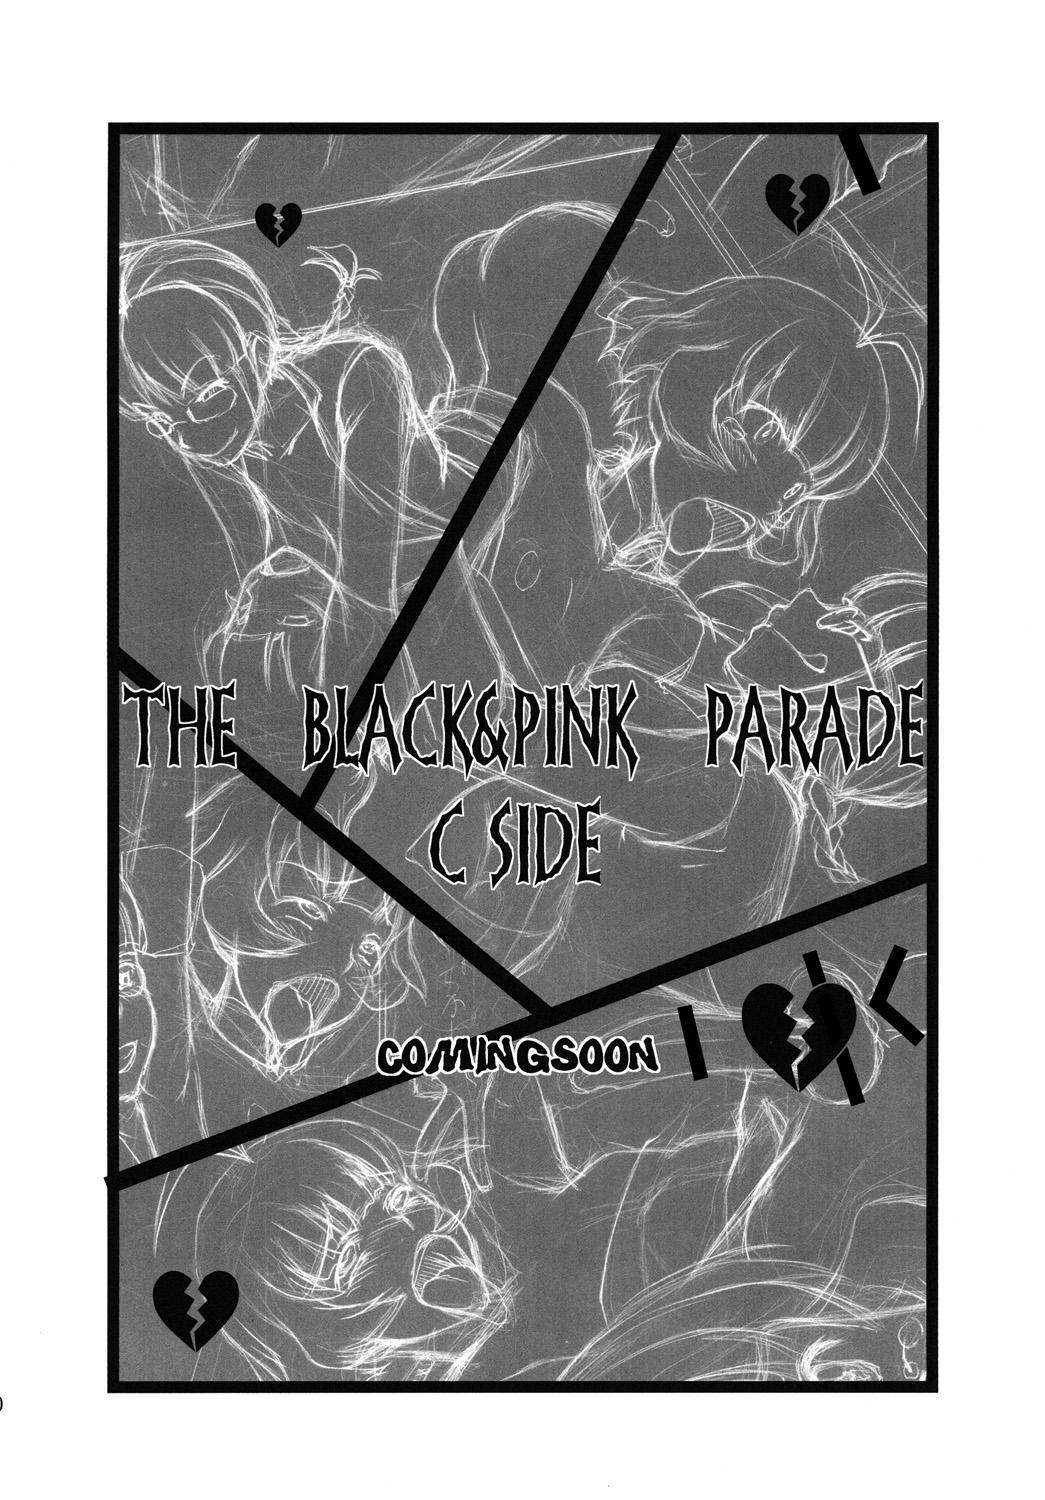 THE BLACK&PINK PARADE B-SIDE 18